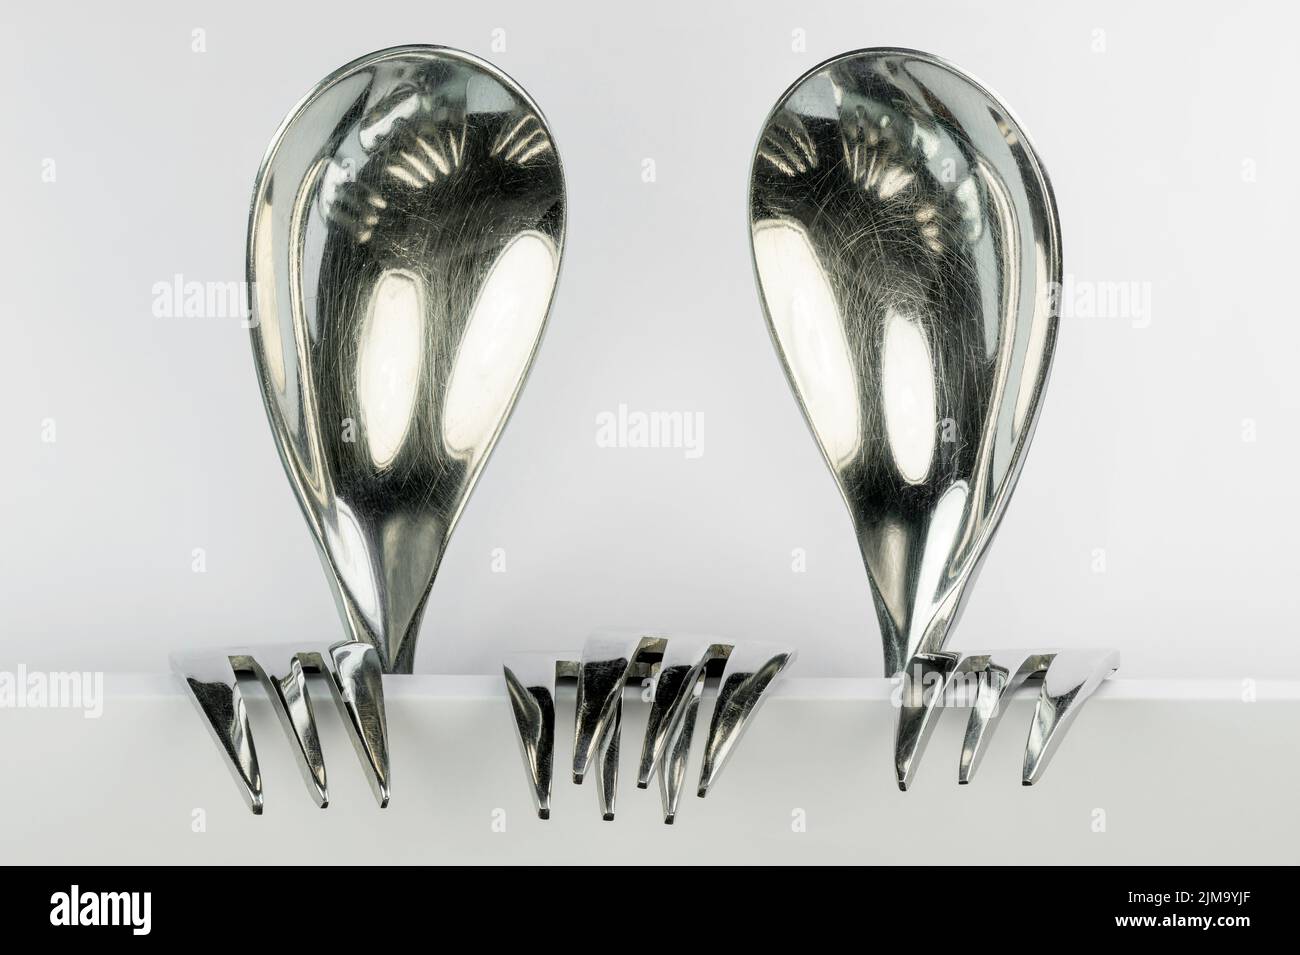 Two figures made of spoons and forks Stock Photo